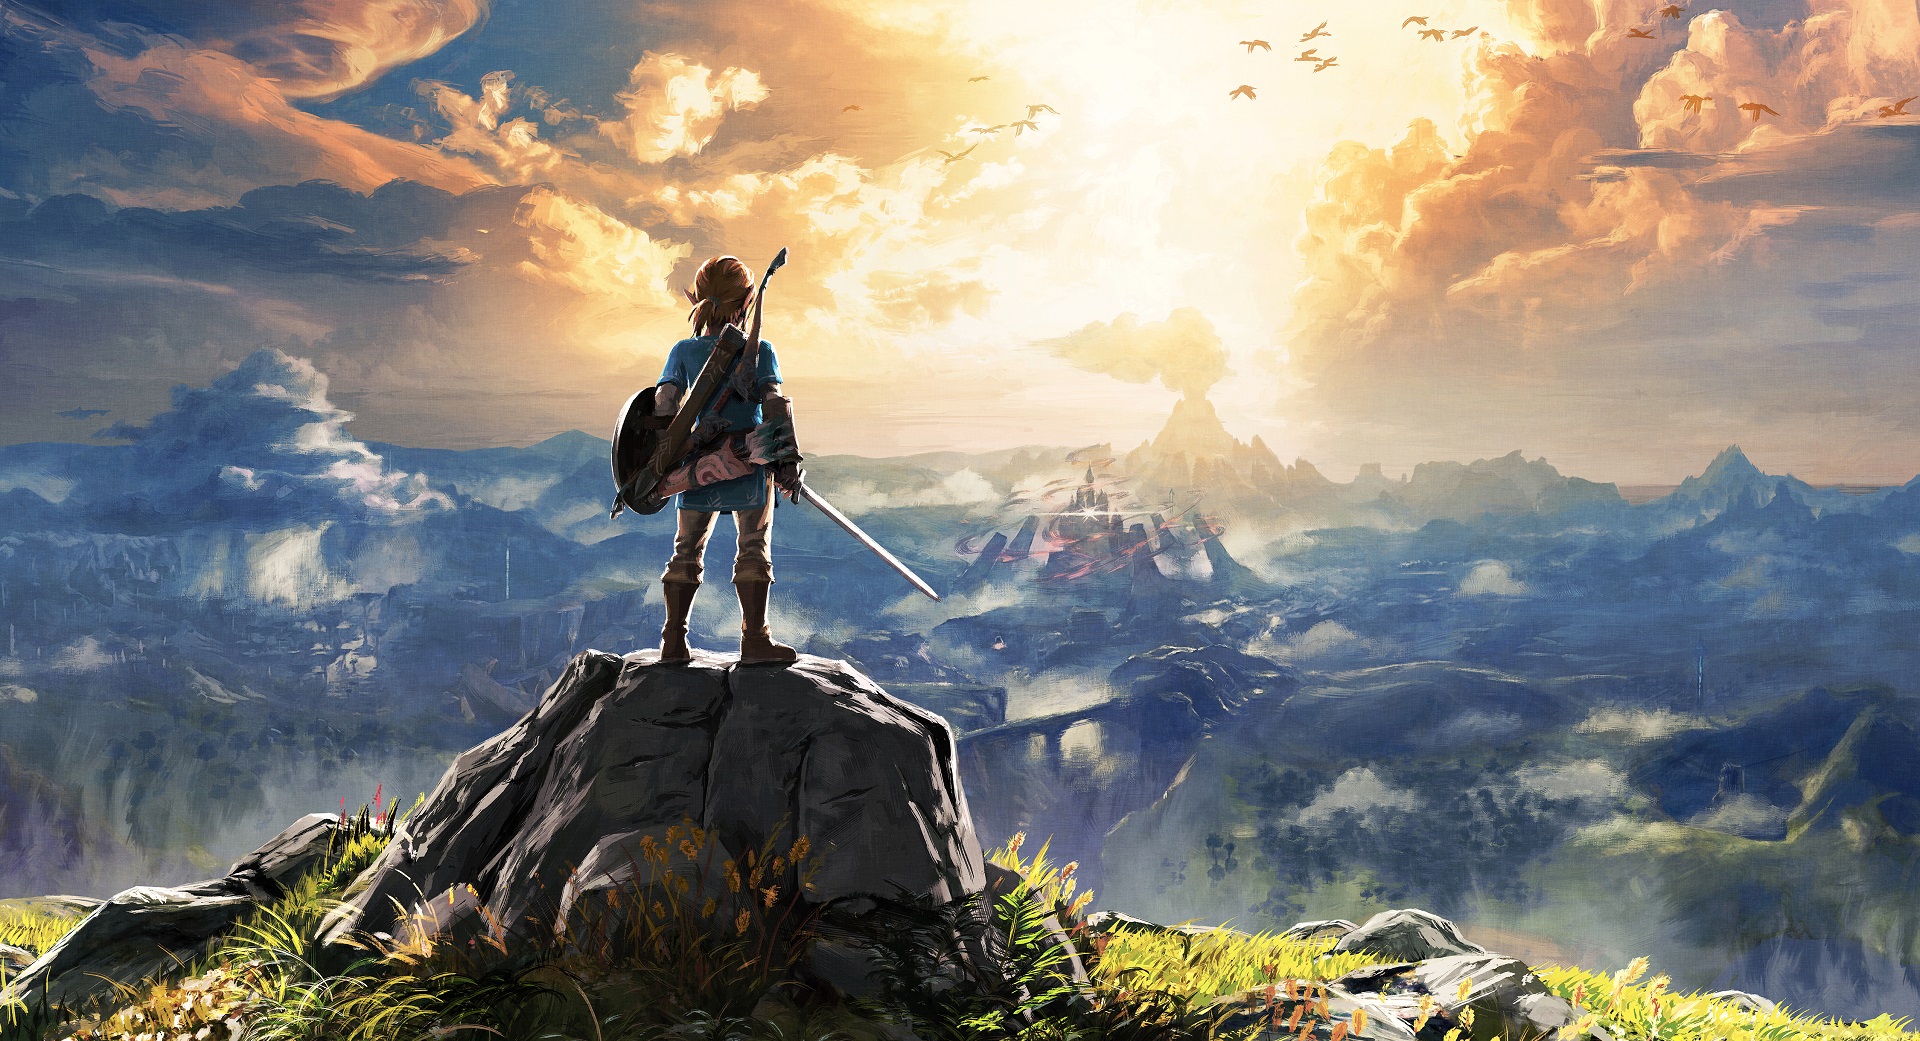 Legend of Zelda: Breath of the Wild Review - An Adventure That Keeps on Giving